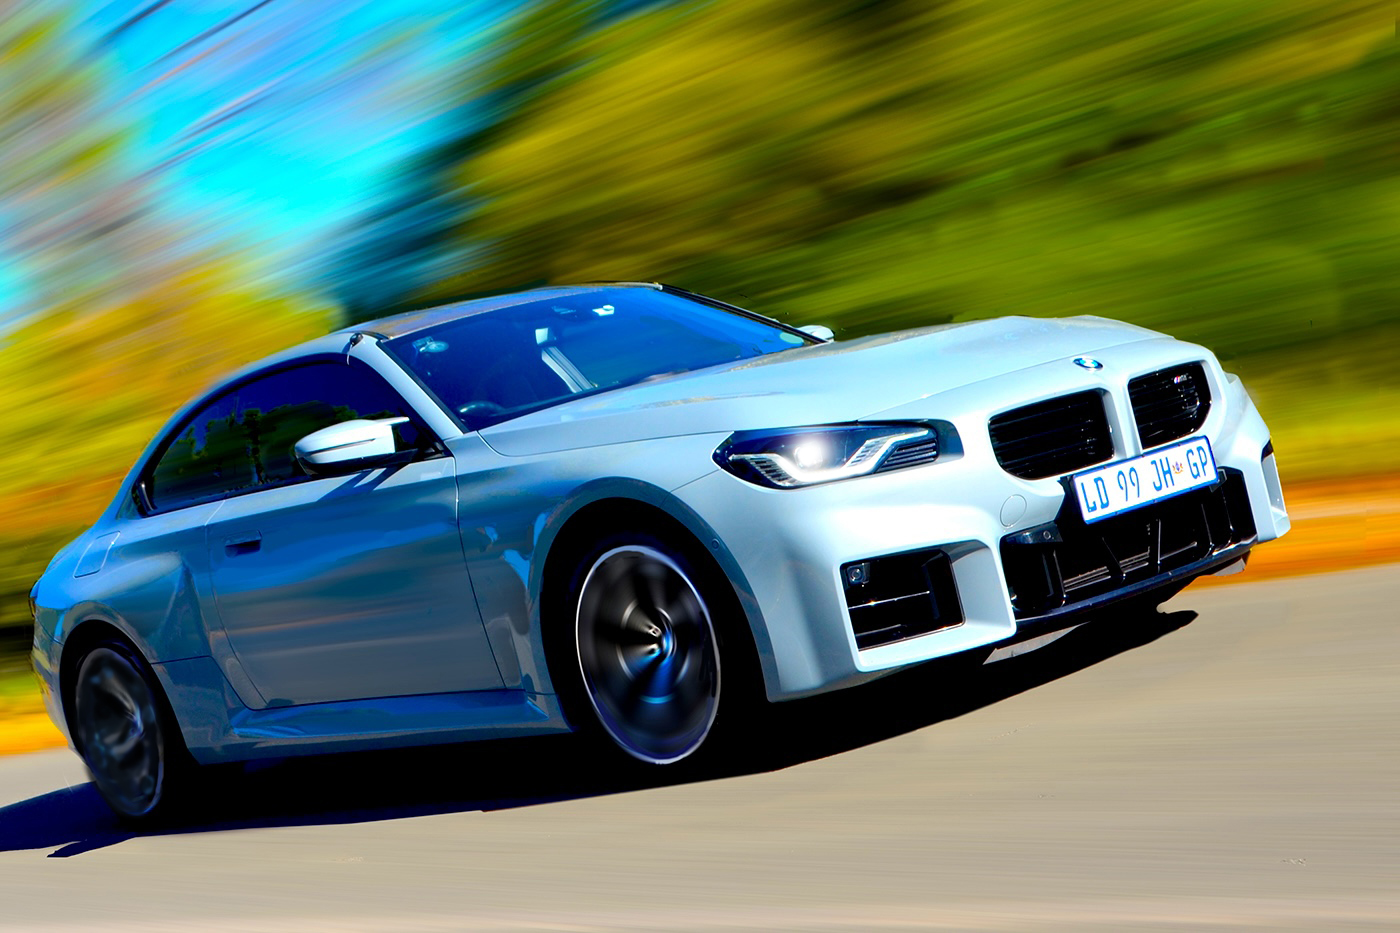 Road Test: Magical BMW M2 Dogged by Crap Tech